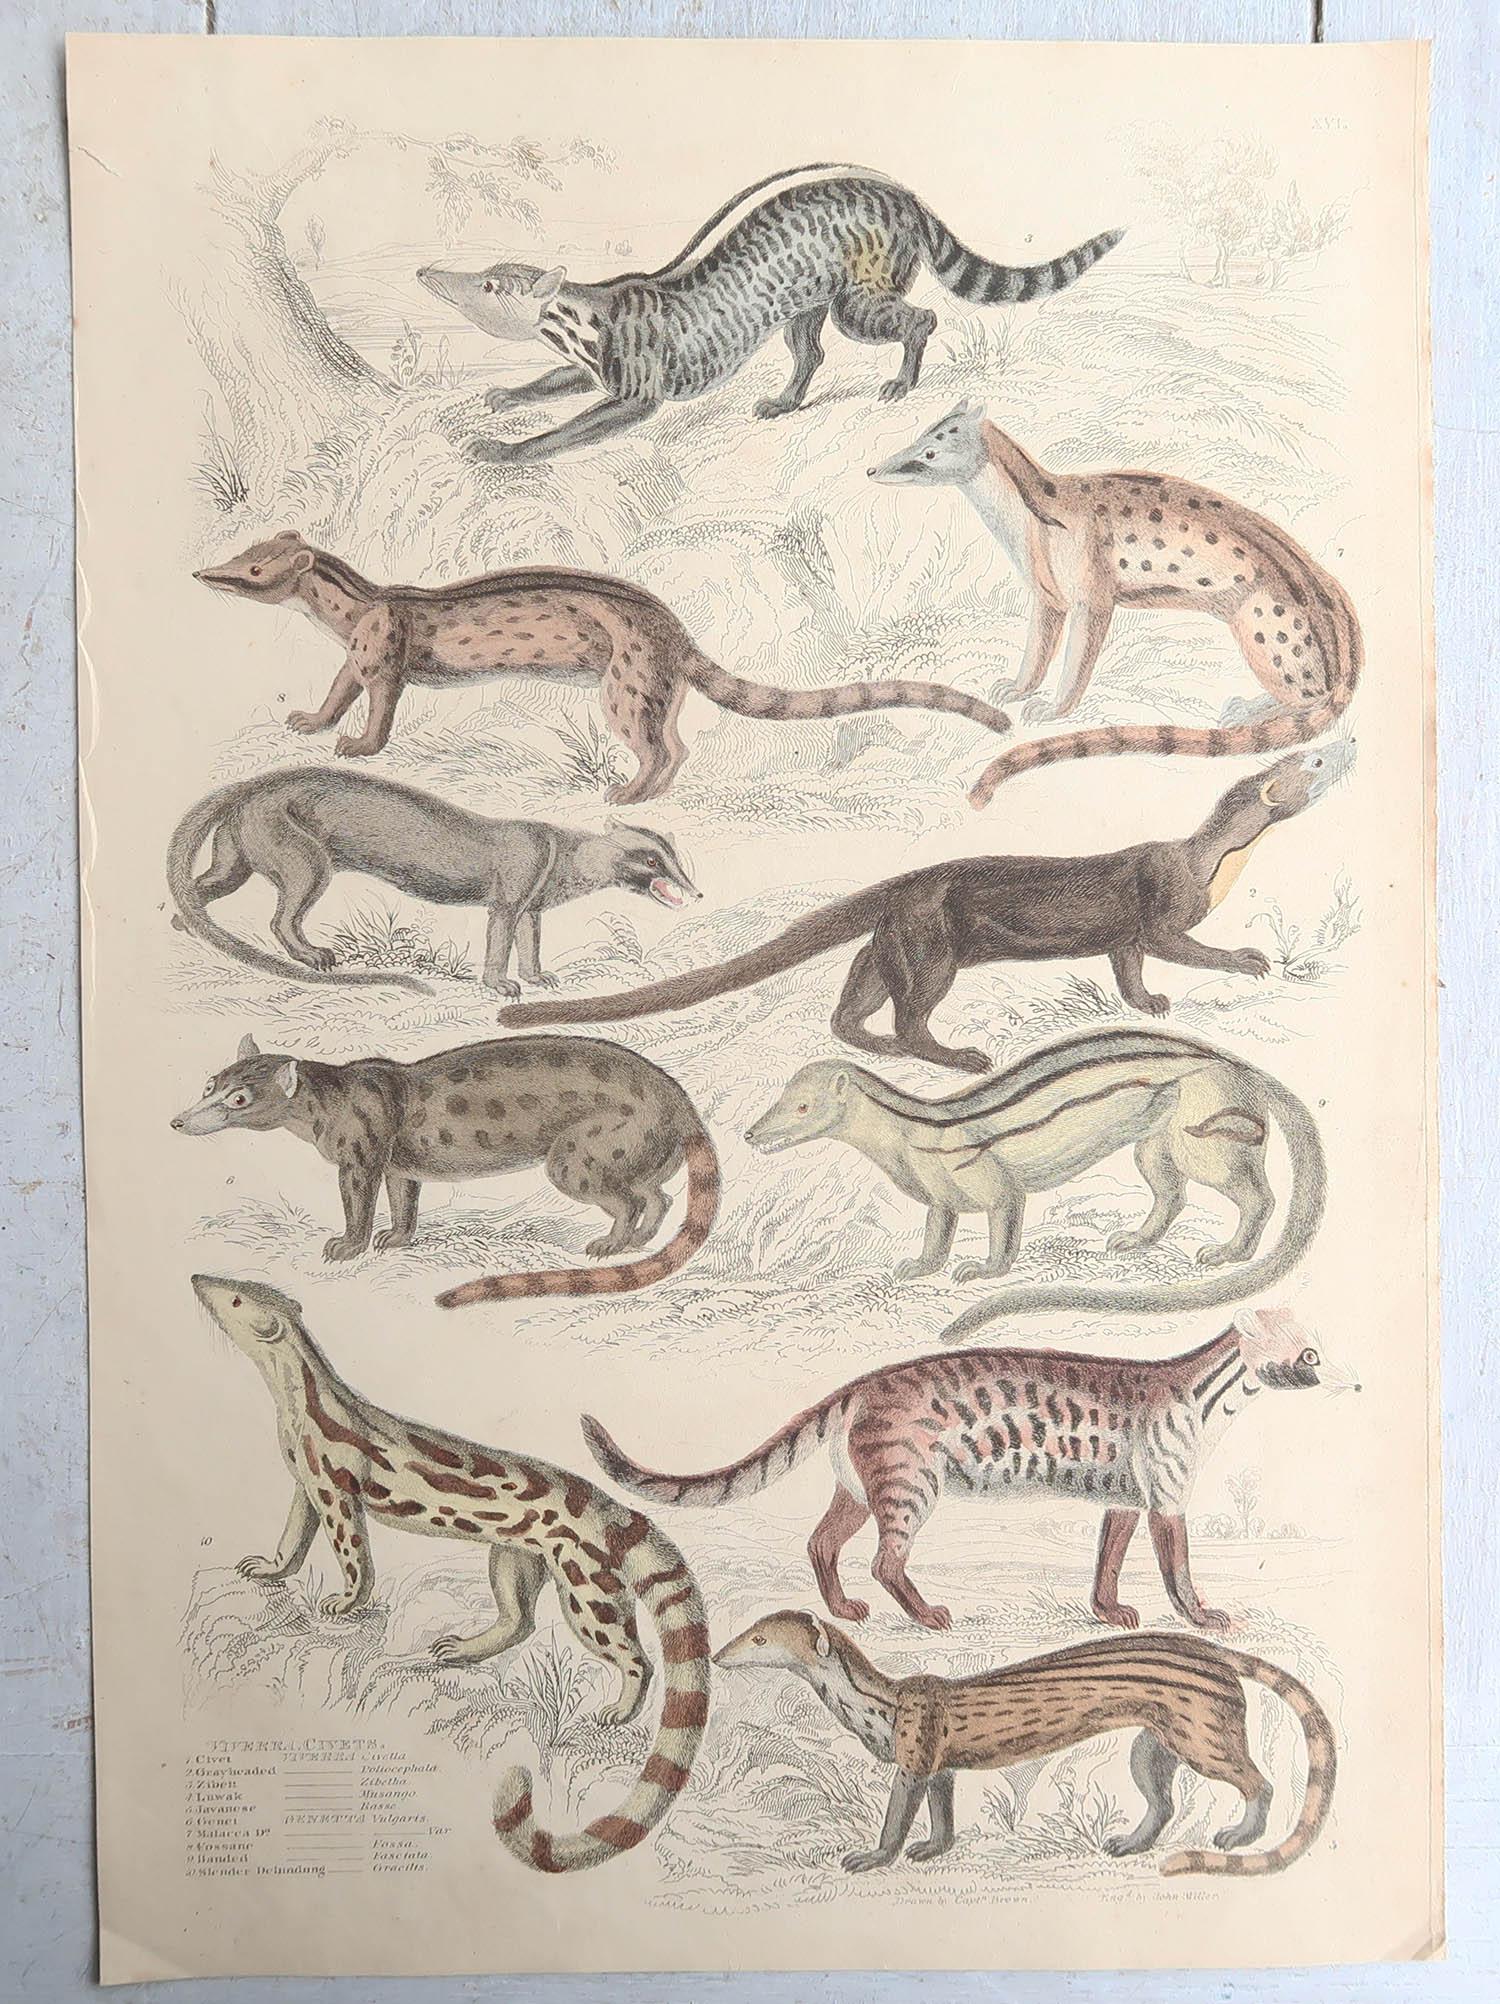 Great set of animal prints

Lithographs after the drawings by Cpt. brown.
 
Original hand color.

Unframed

The measurement given below is for one print.